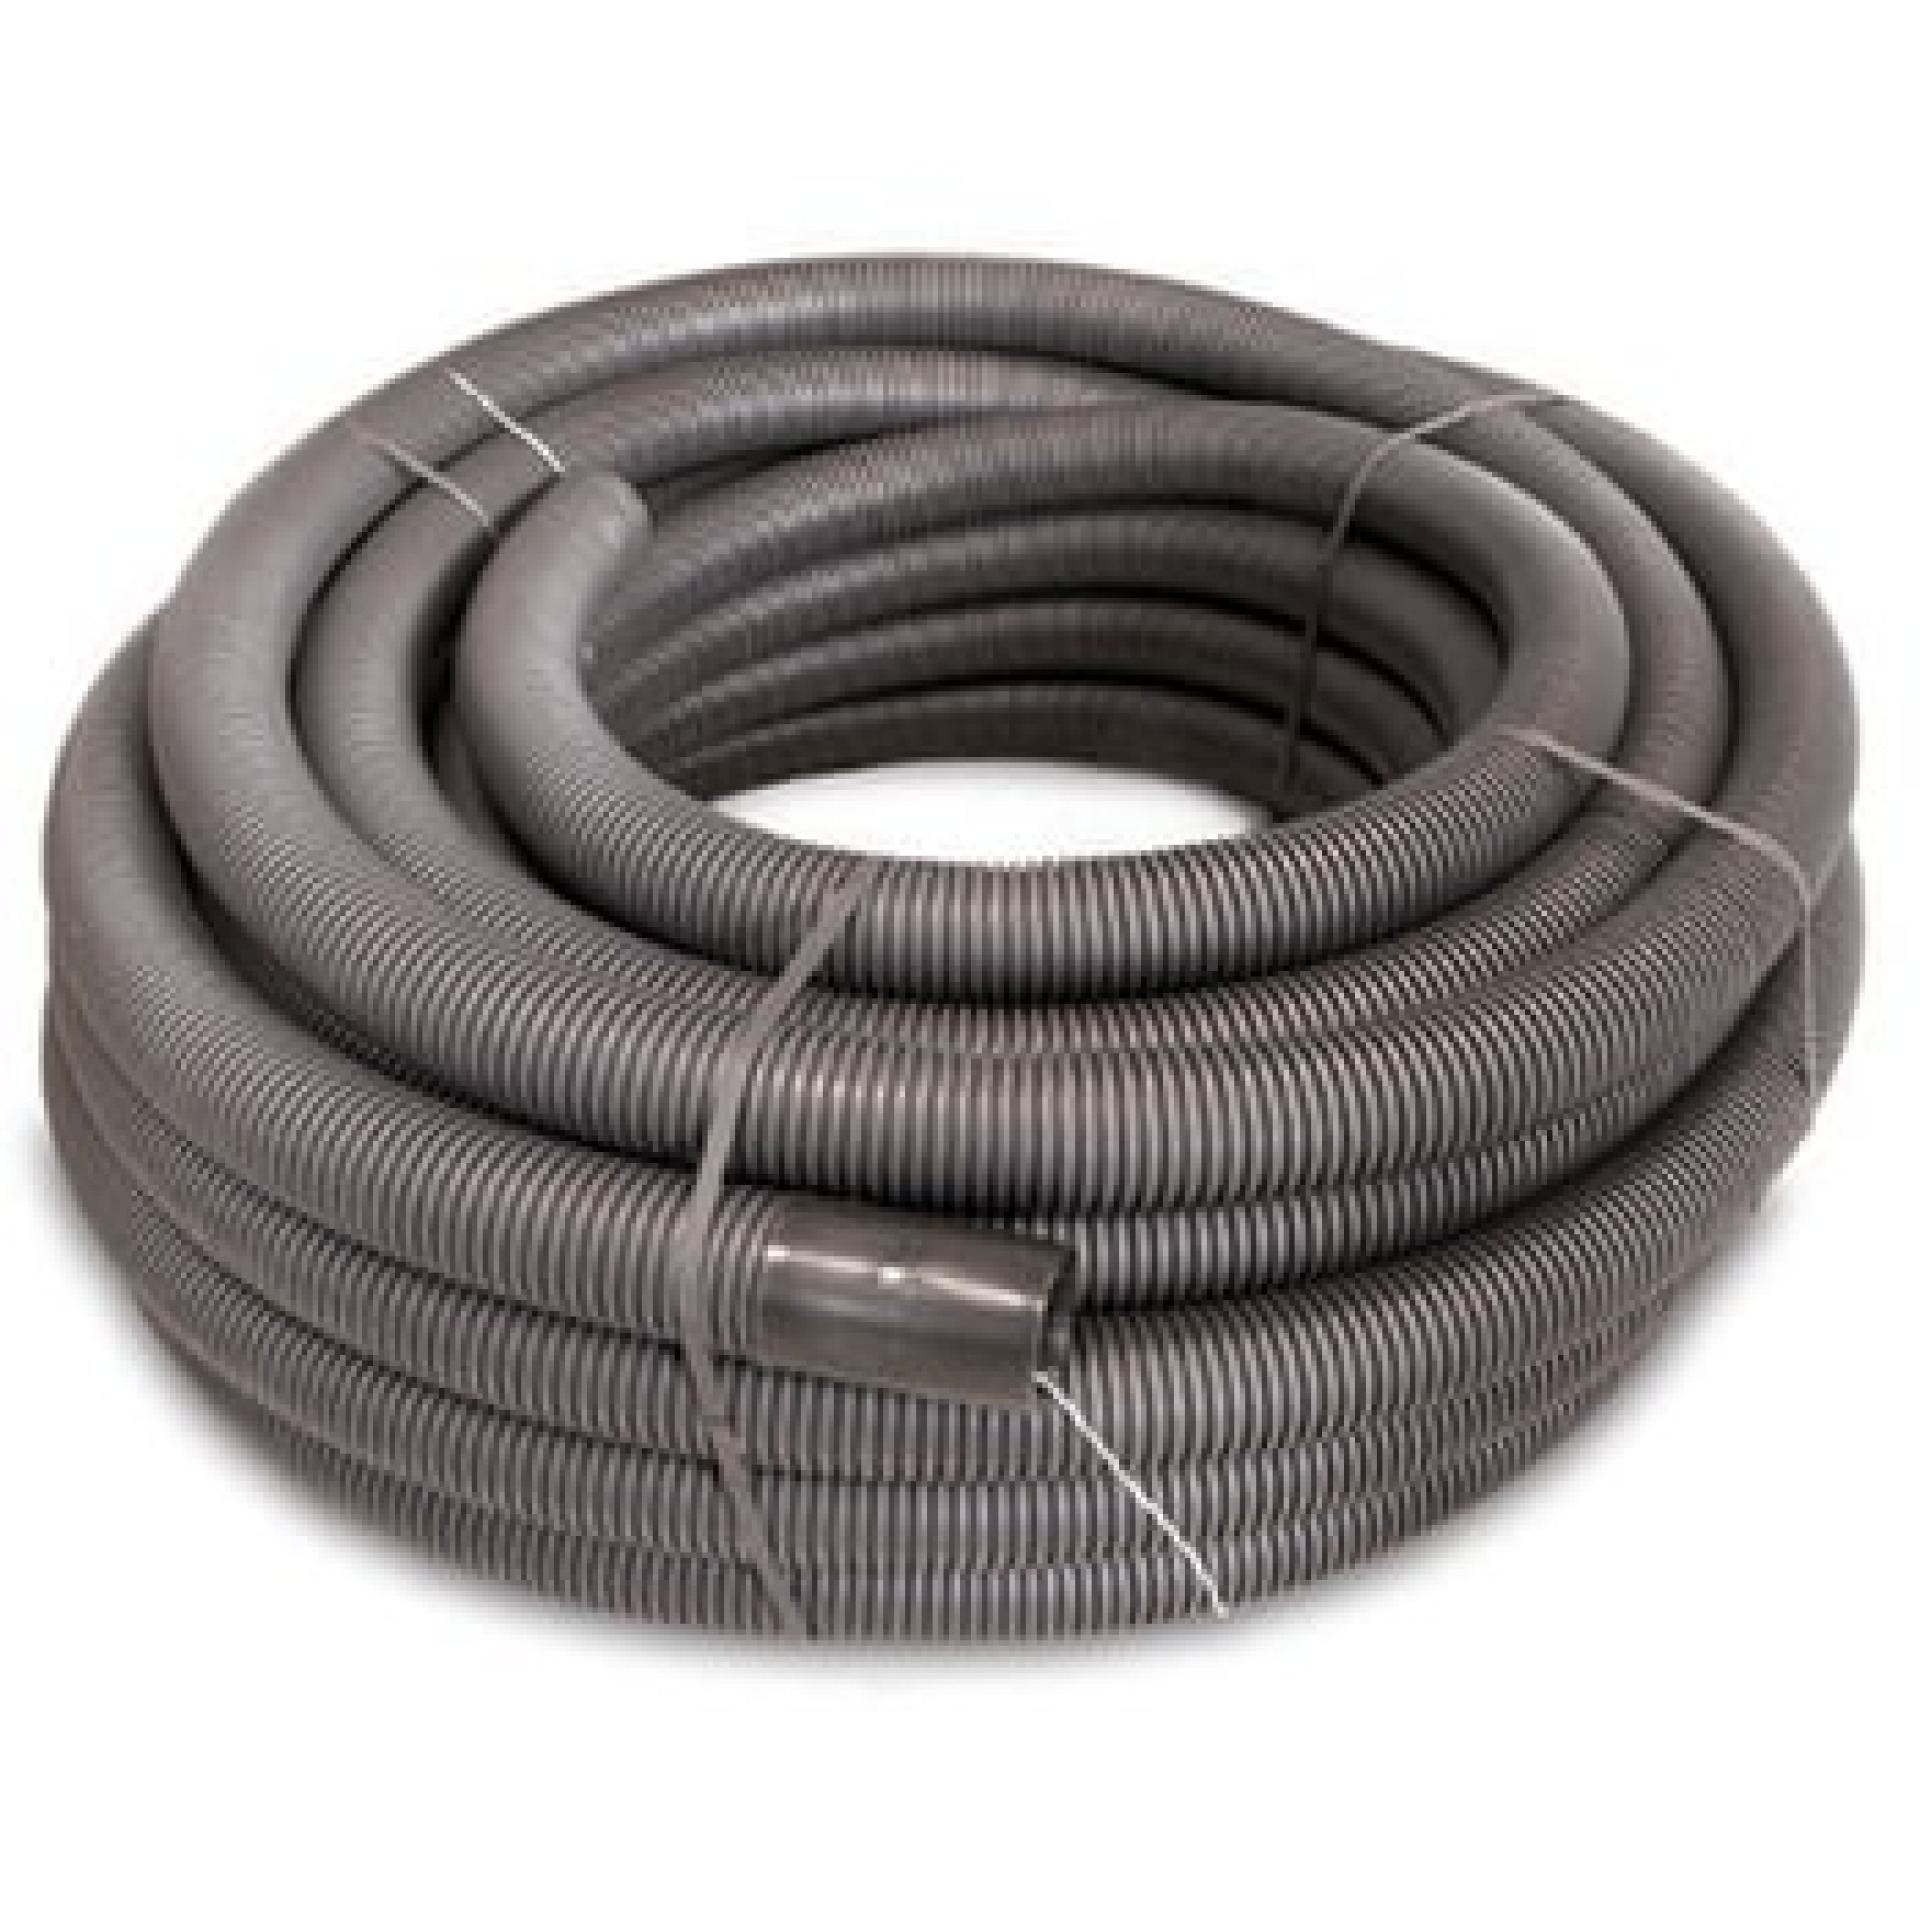 Flexible Conduit 75mm halogenfree, dobb wall, with draw-in wire black